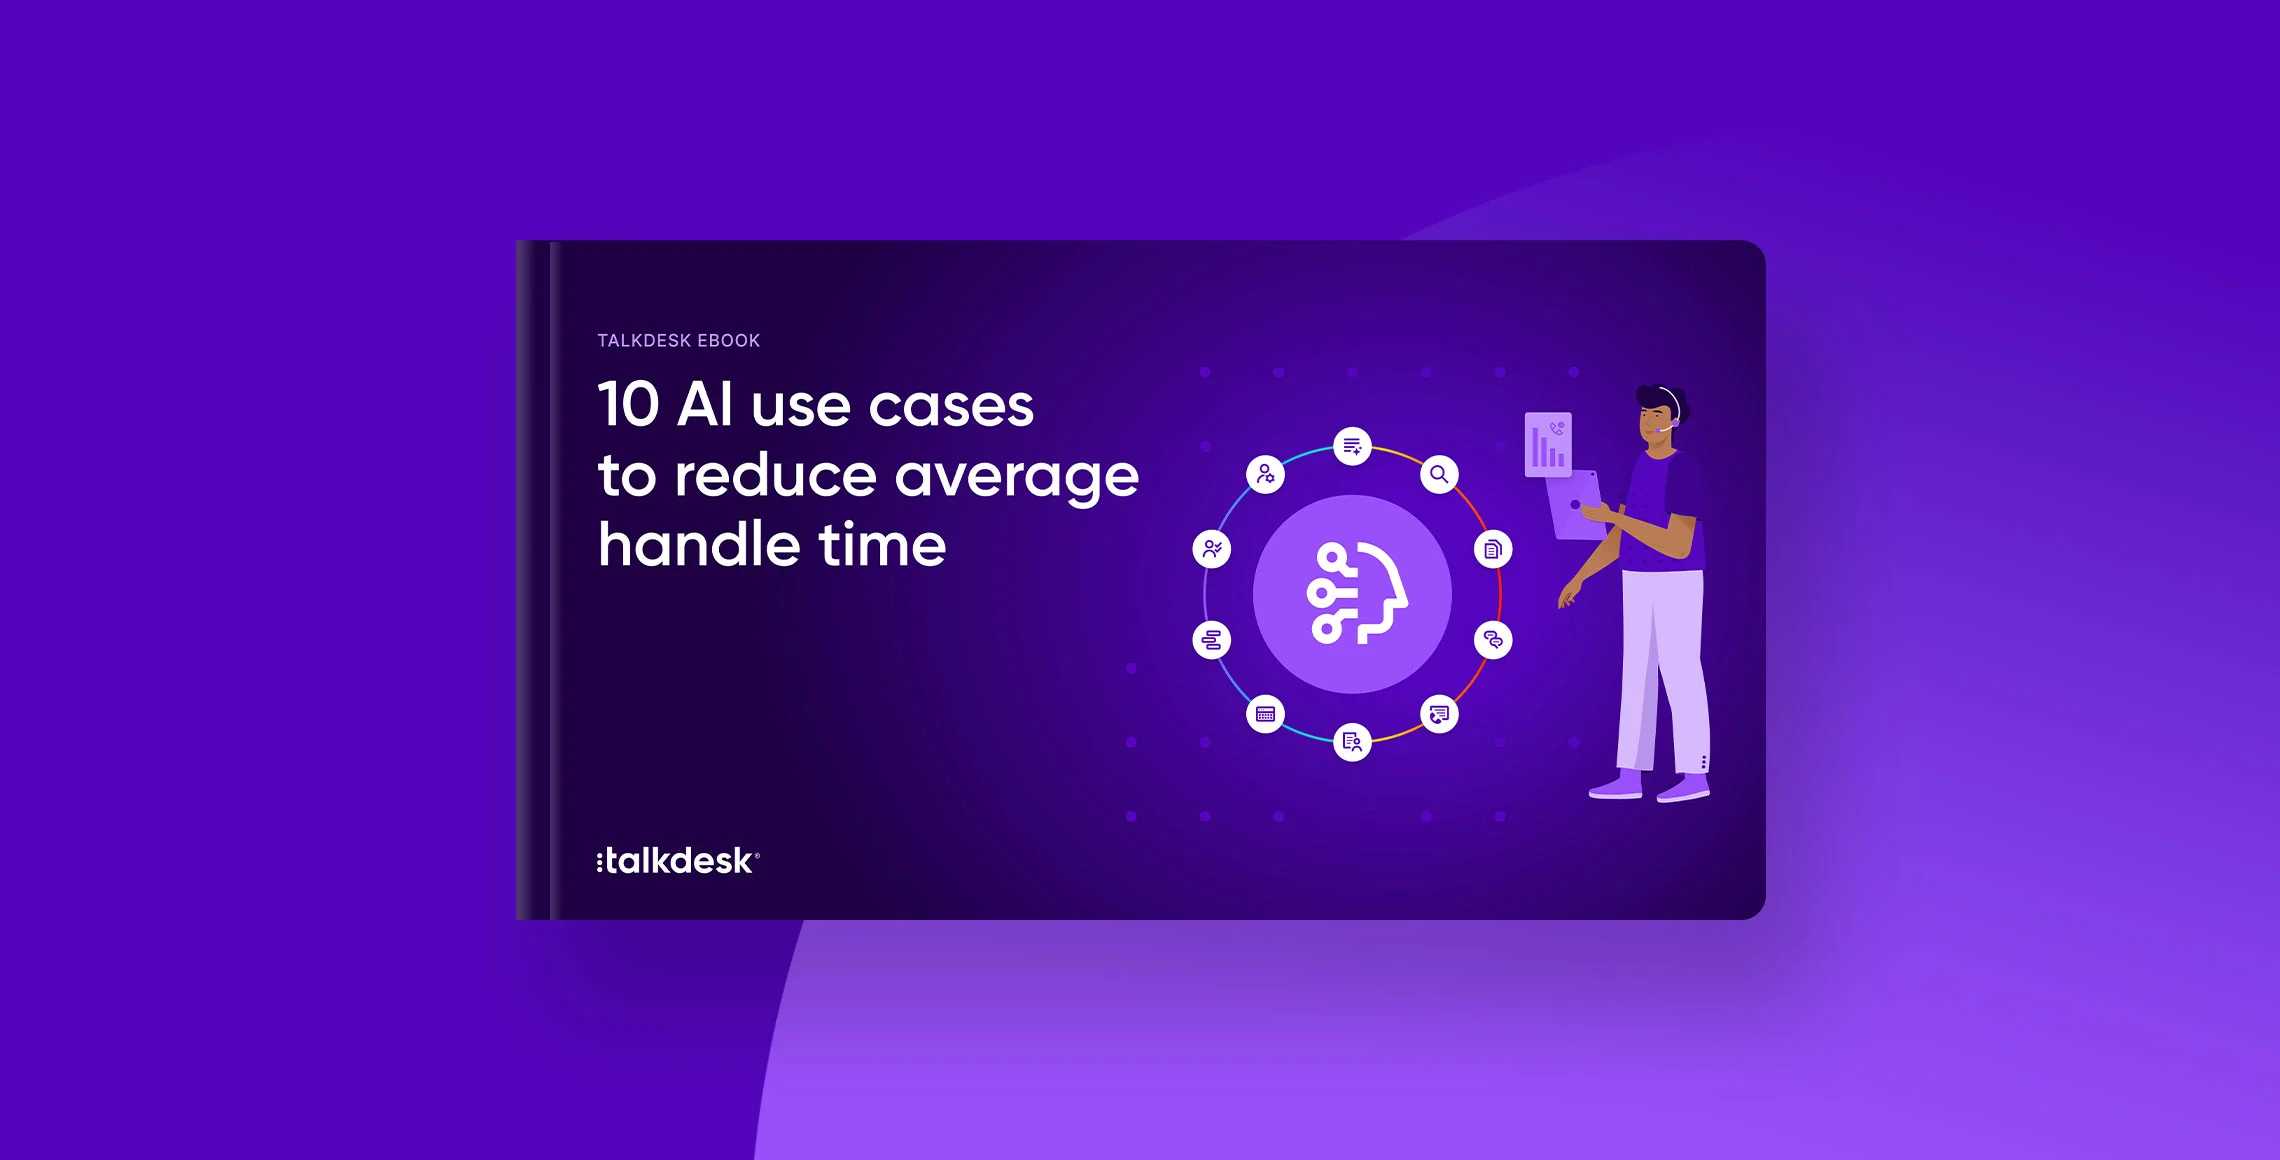 10 Use Cases Reduce Average Handle Time